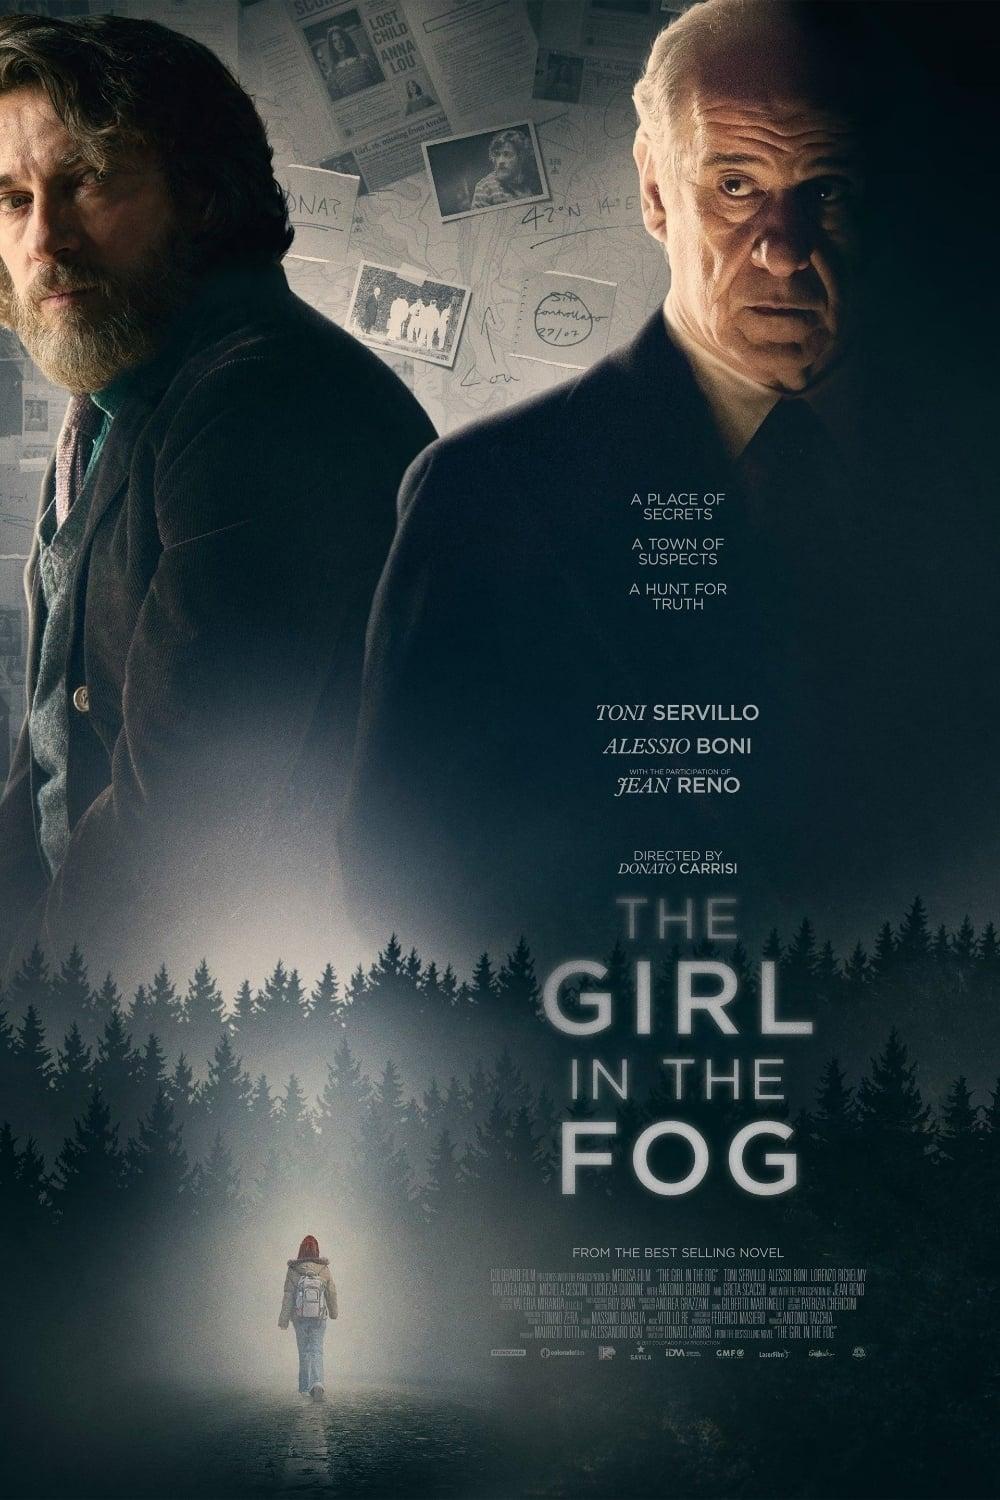 The Girl in the Fog poster